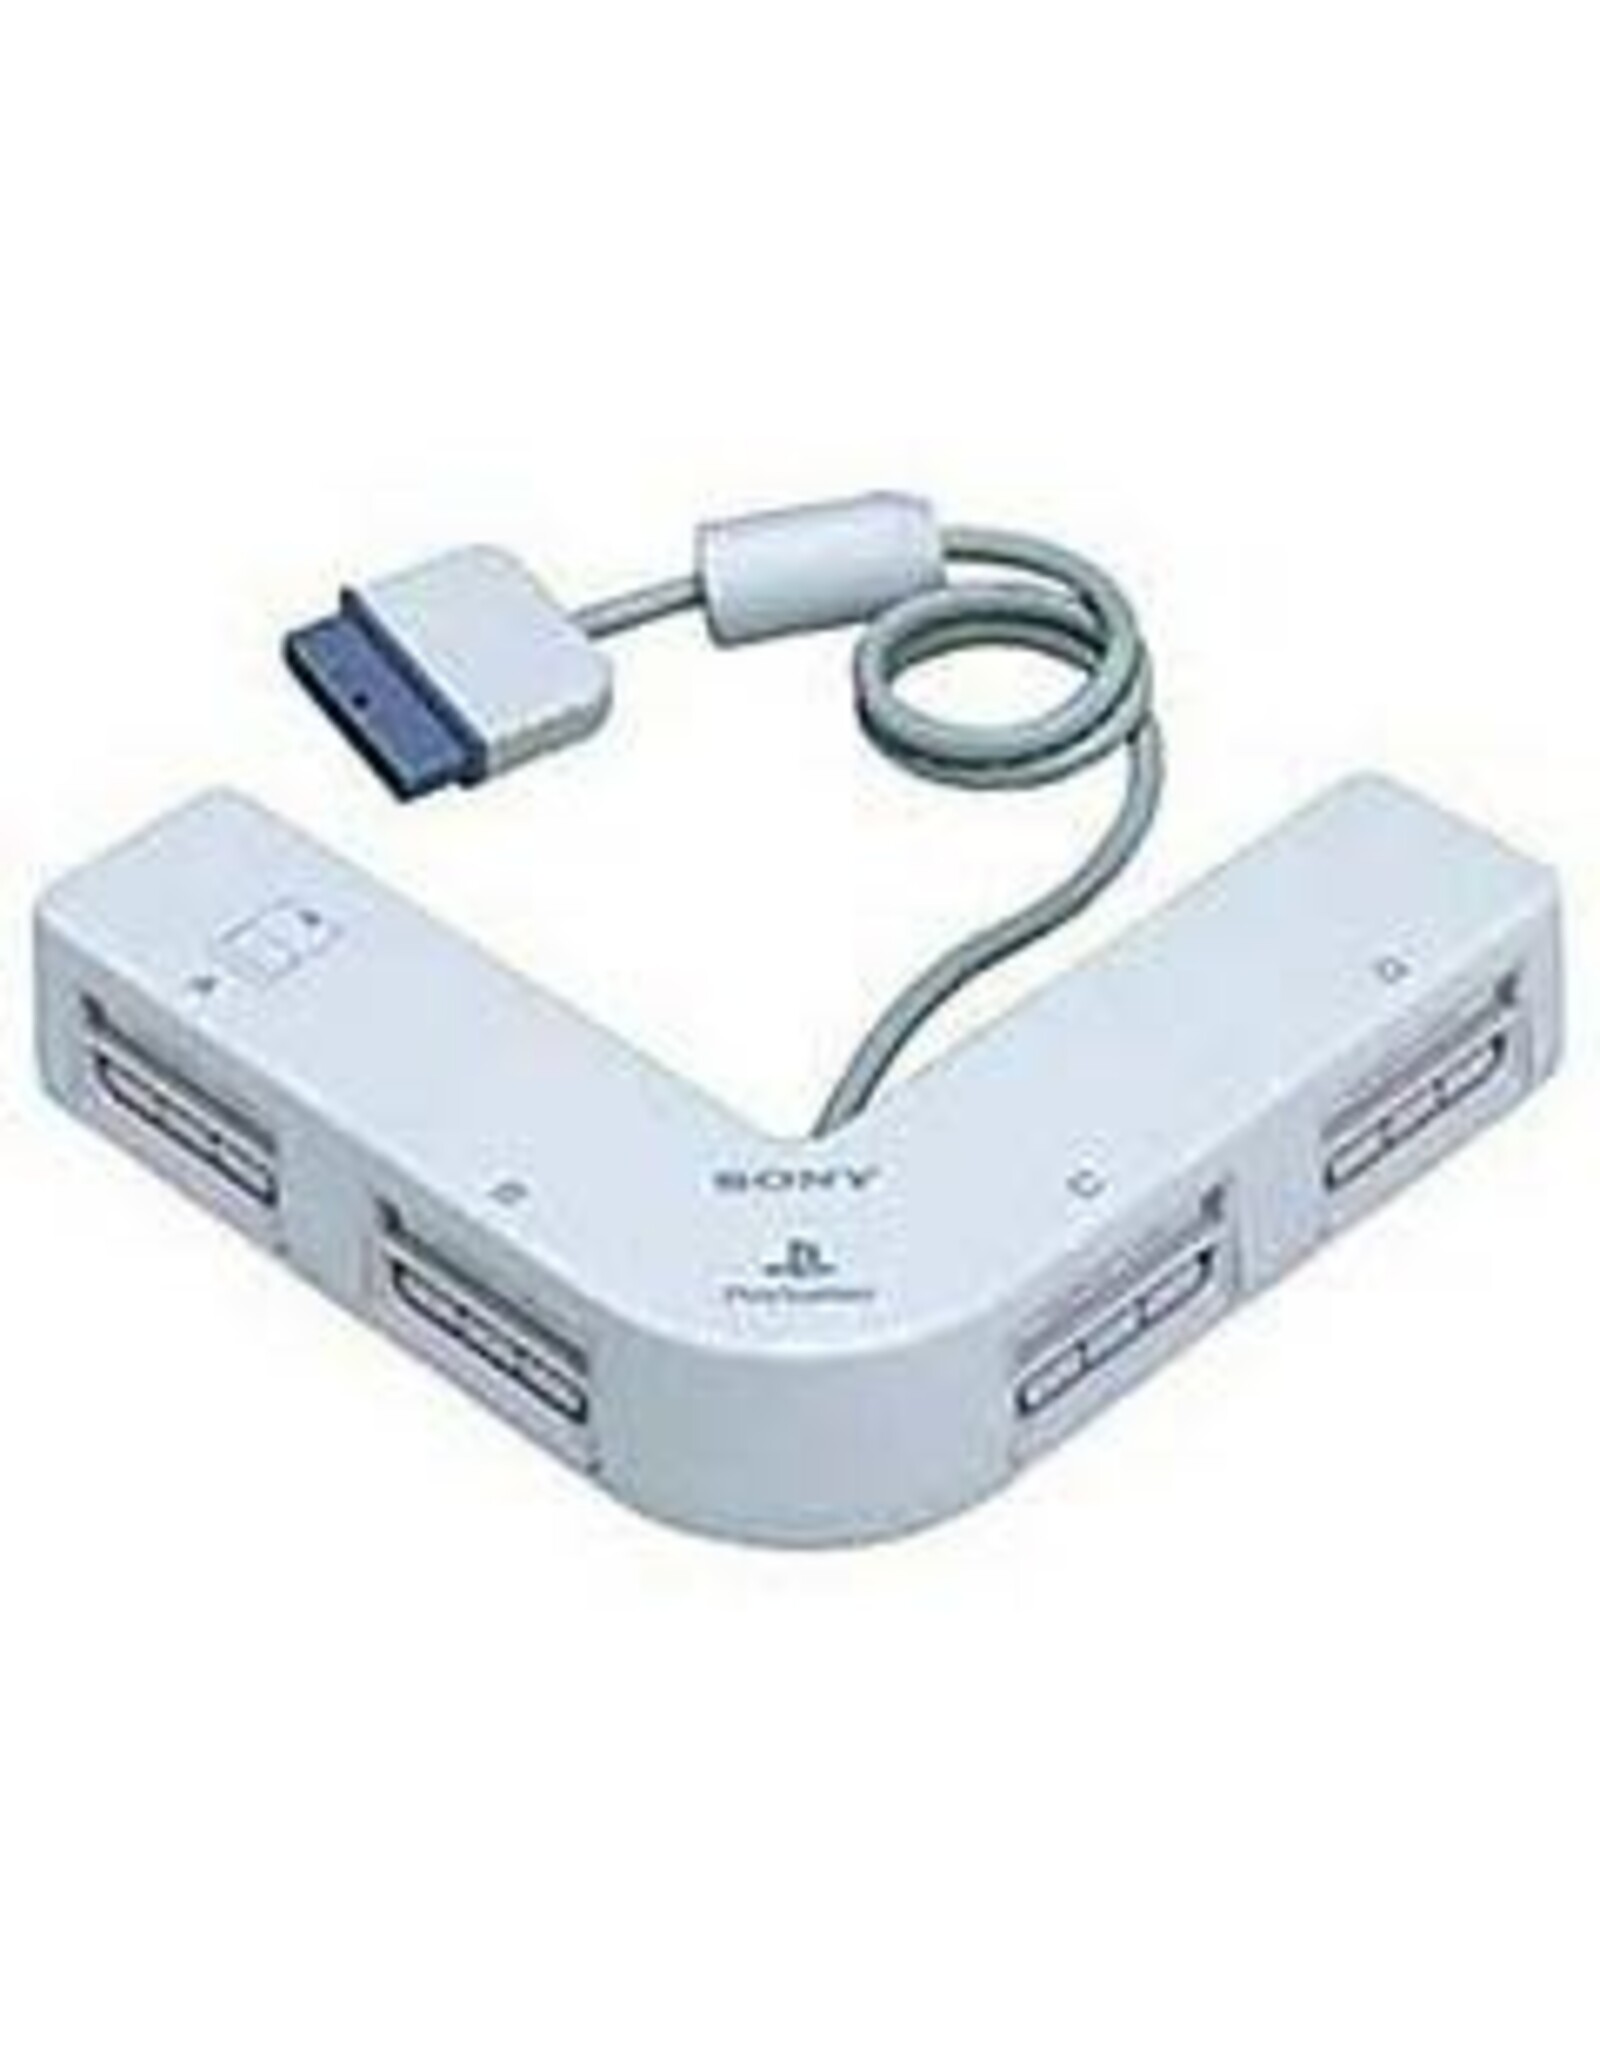 Playstation PS1 Playstation MultiTap Adaptor (OEM, Used, Colour May Vary)